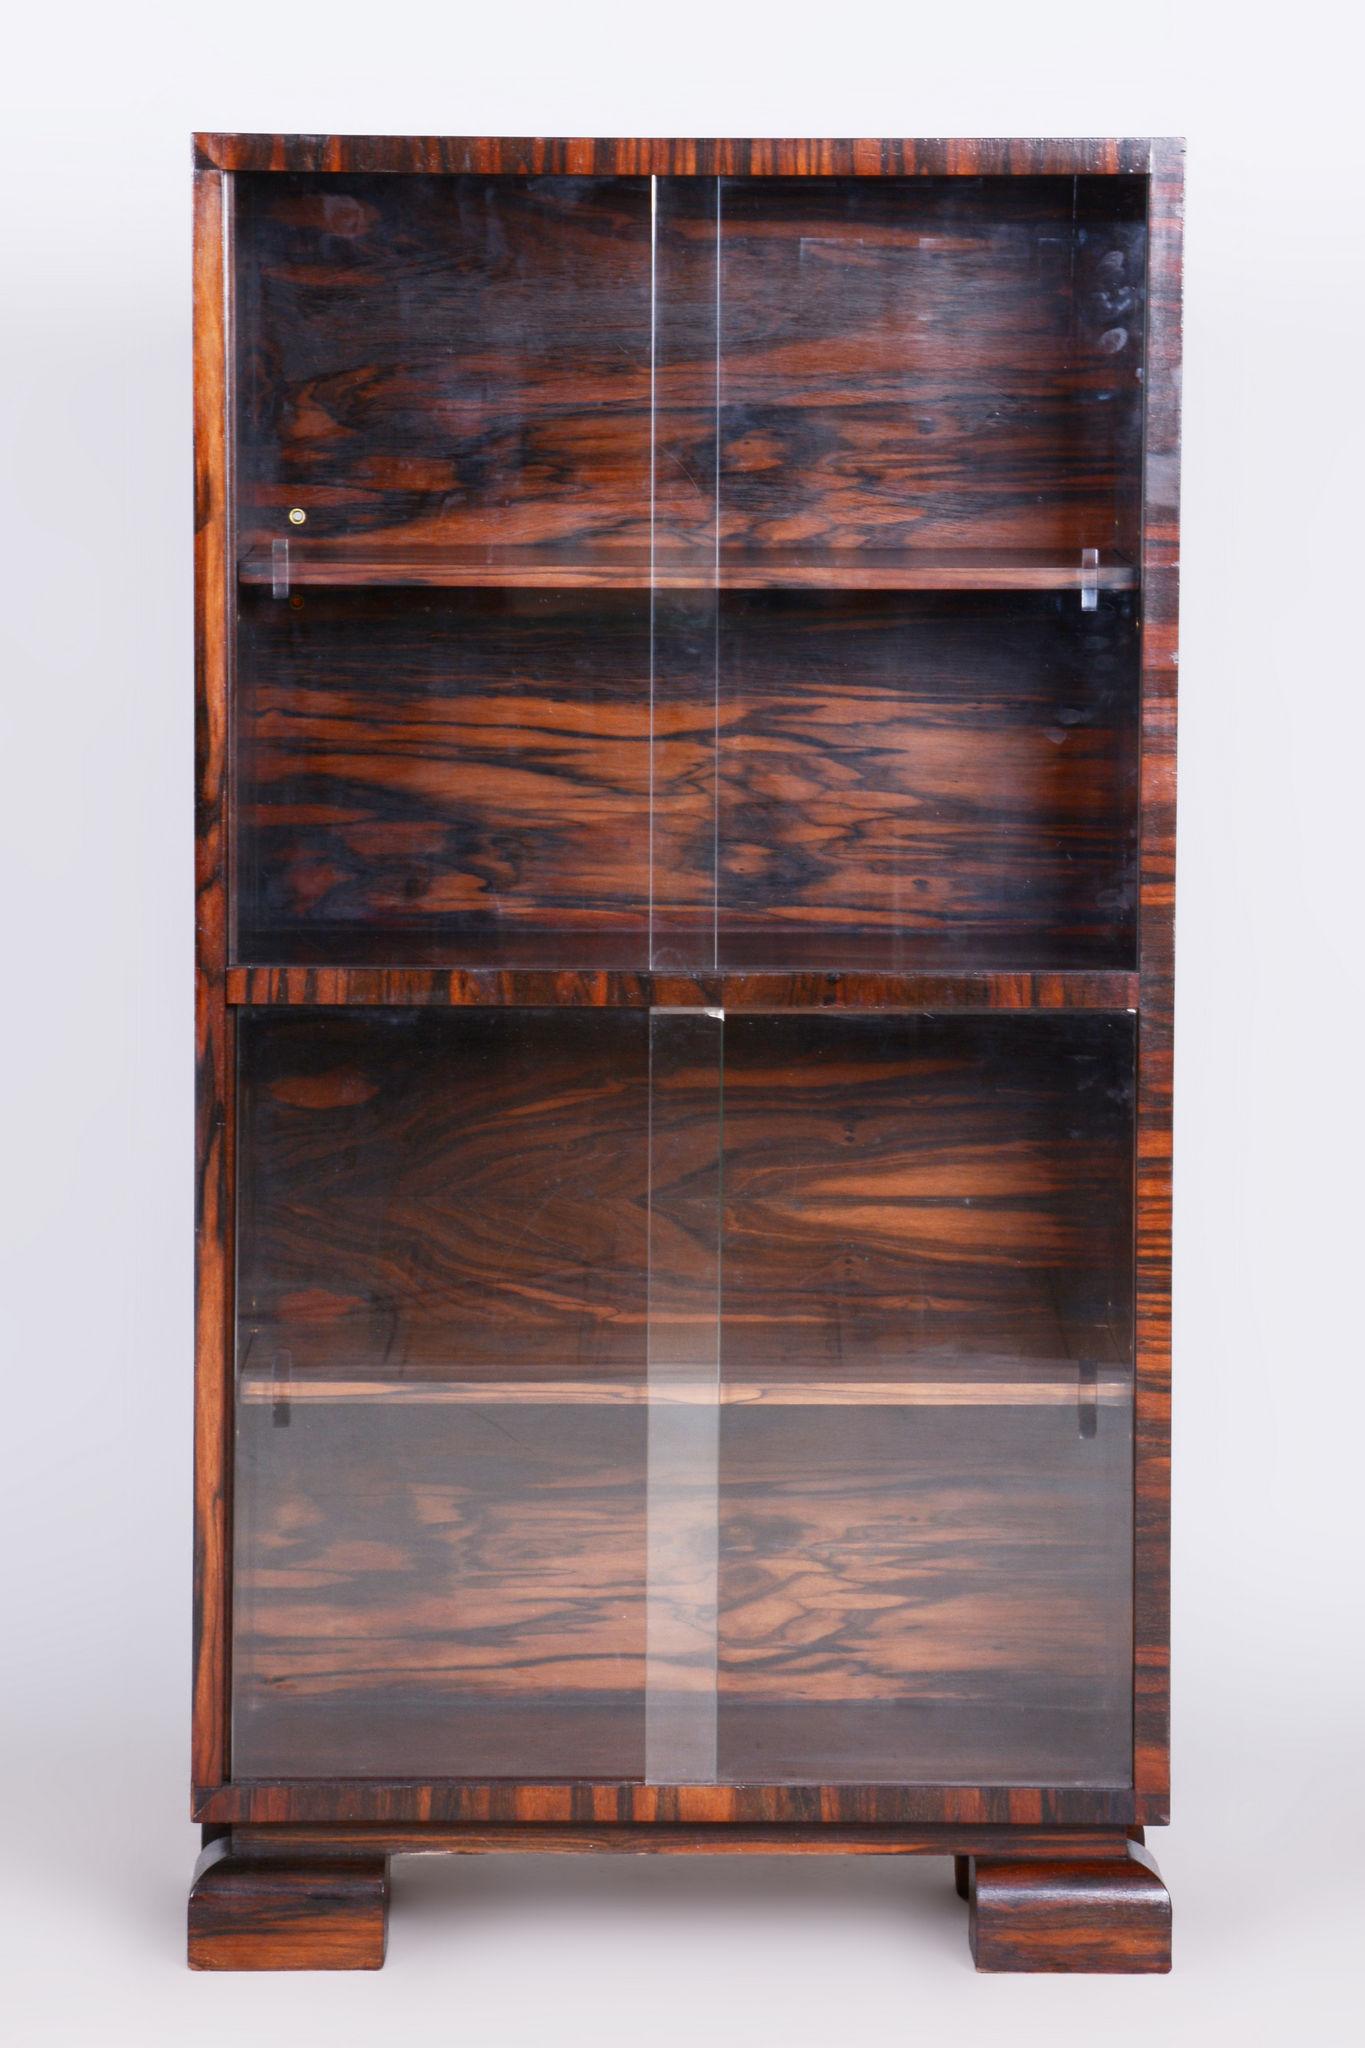 Restored Art Deco bookcase

Source: Czechia
Period: 1930-1939
Material: Macassar, Glass
Architect: Oldřich Liška

Restored to a luxurious finish. 

It has been re-polished with polyutherane piano lacquer by our professional refurbishing team in